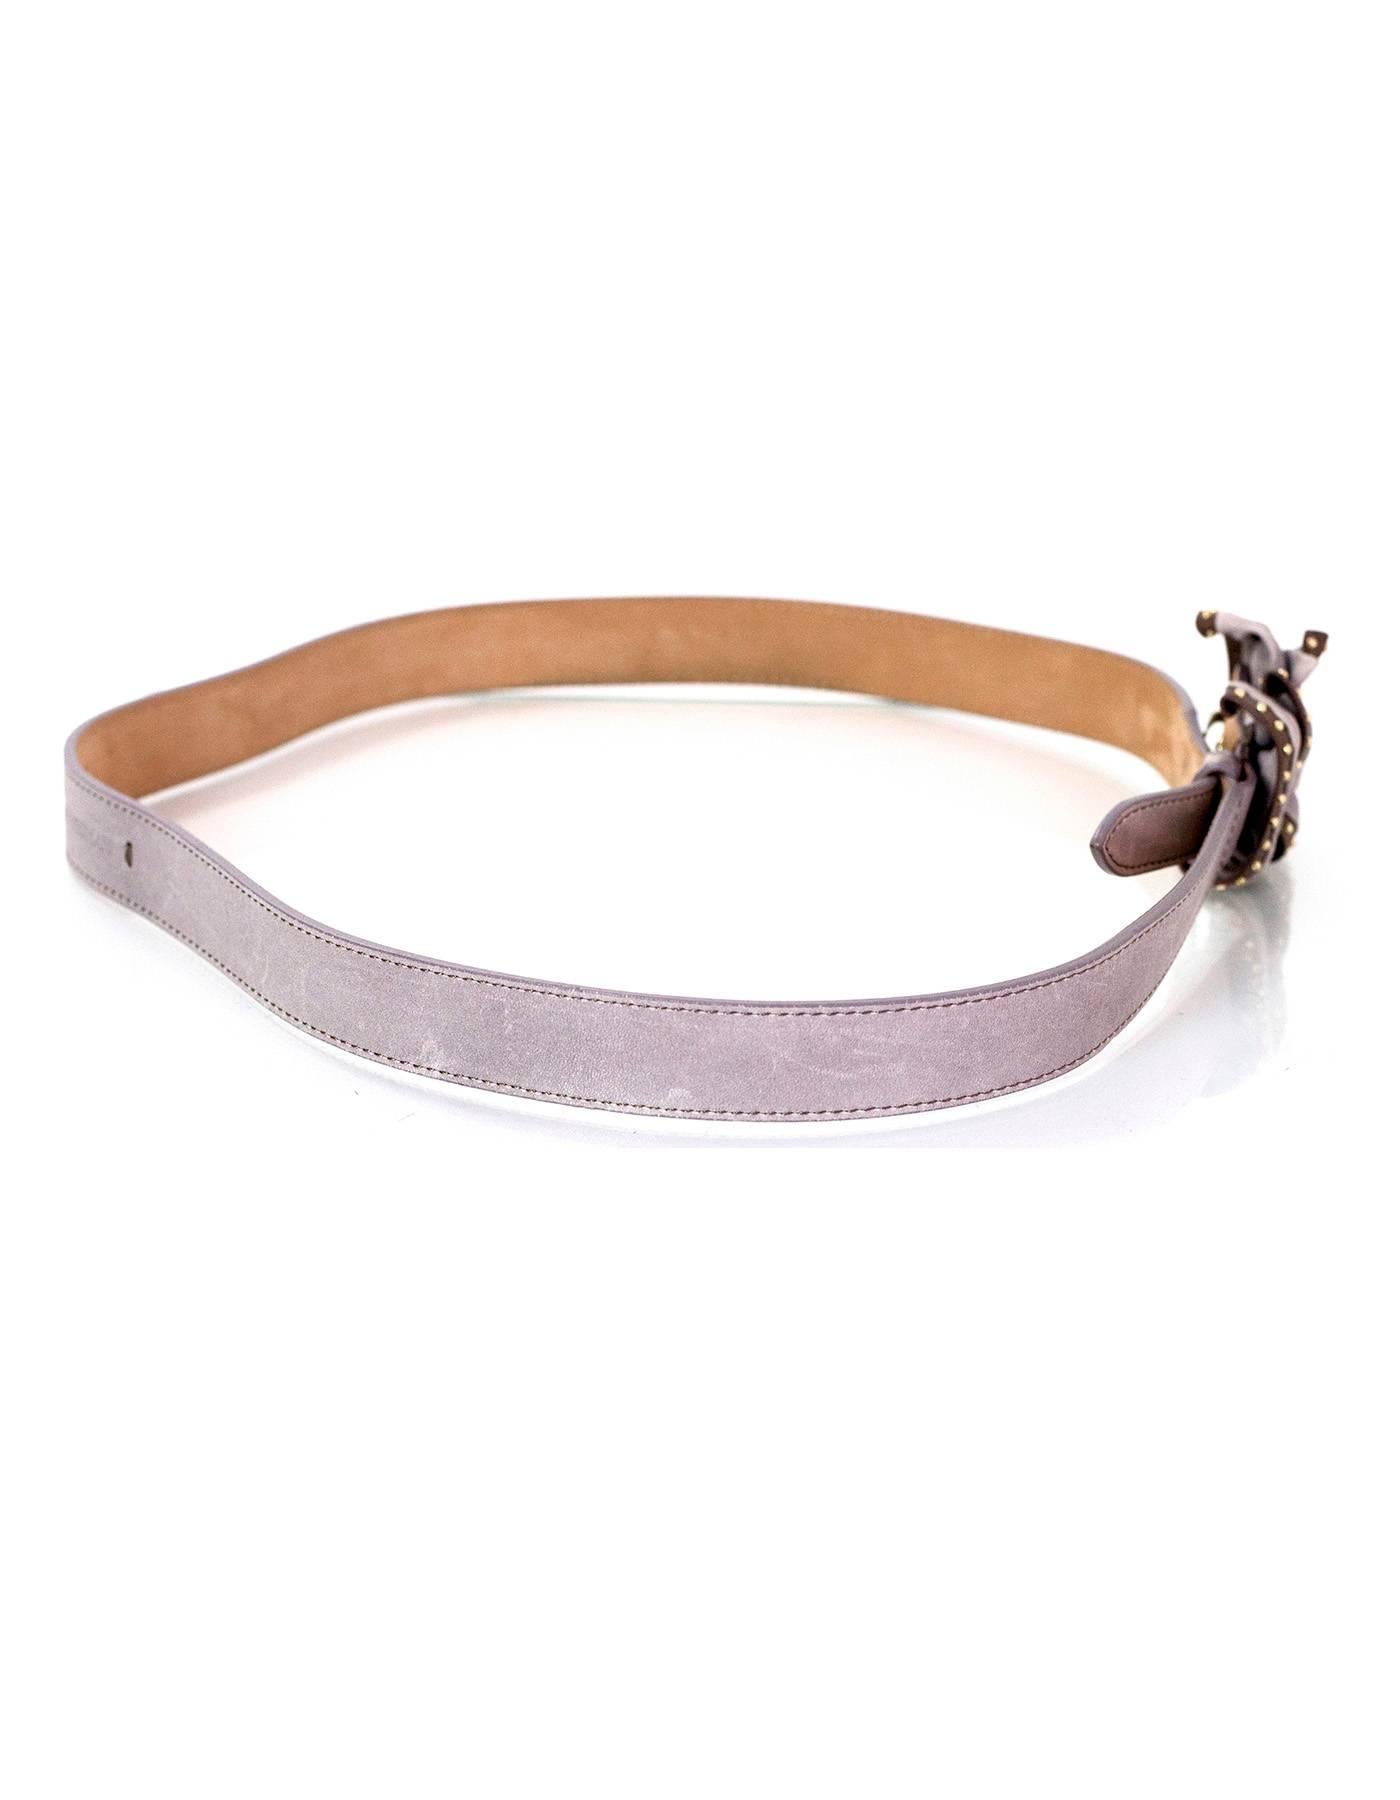 Emporio Armani Grey Leather Belt 
Features grey and taupe bow at buckle with goldtone studs

Made In: Italy
Color: Grey and taupe
Materials: Leather
Closure/Opening: Hook closure
Stamp: Genuine Leather YEW E83
Overall Condition: Excellent pre-owned